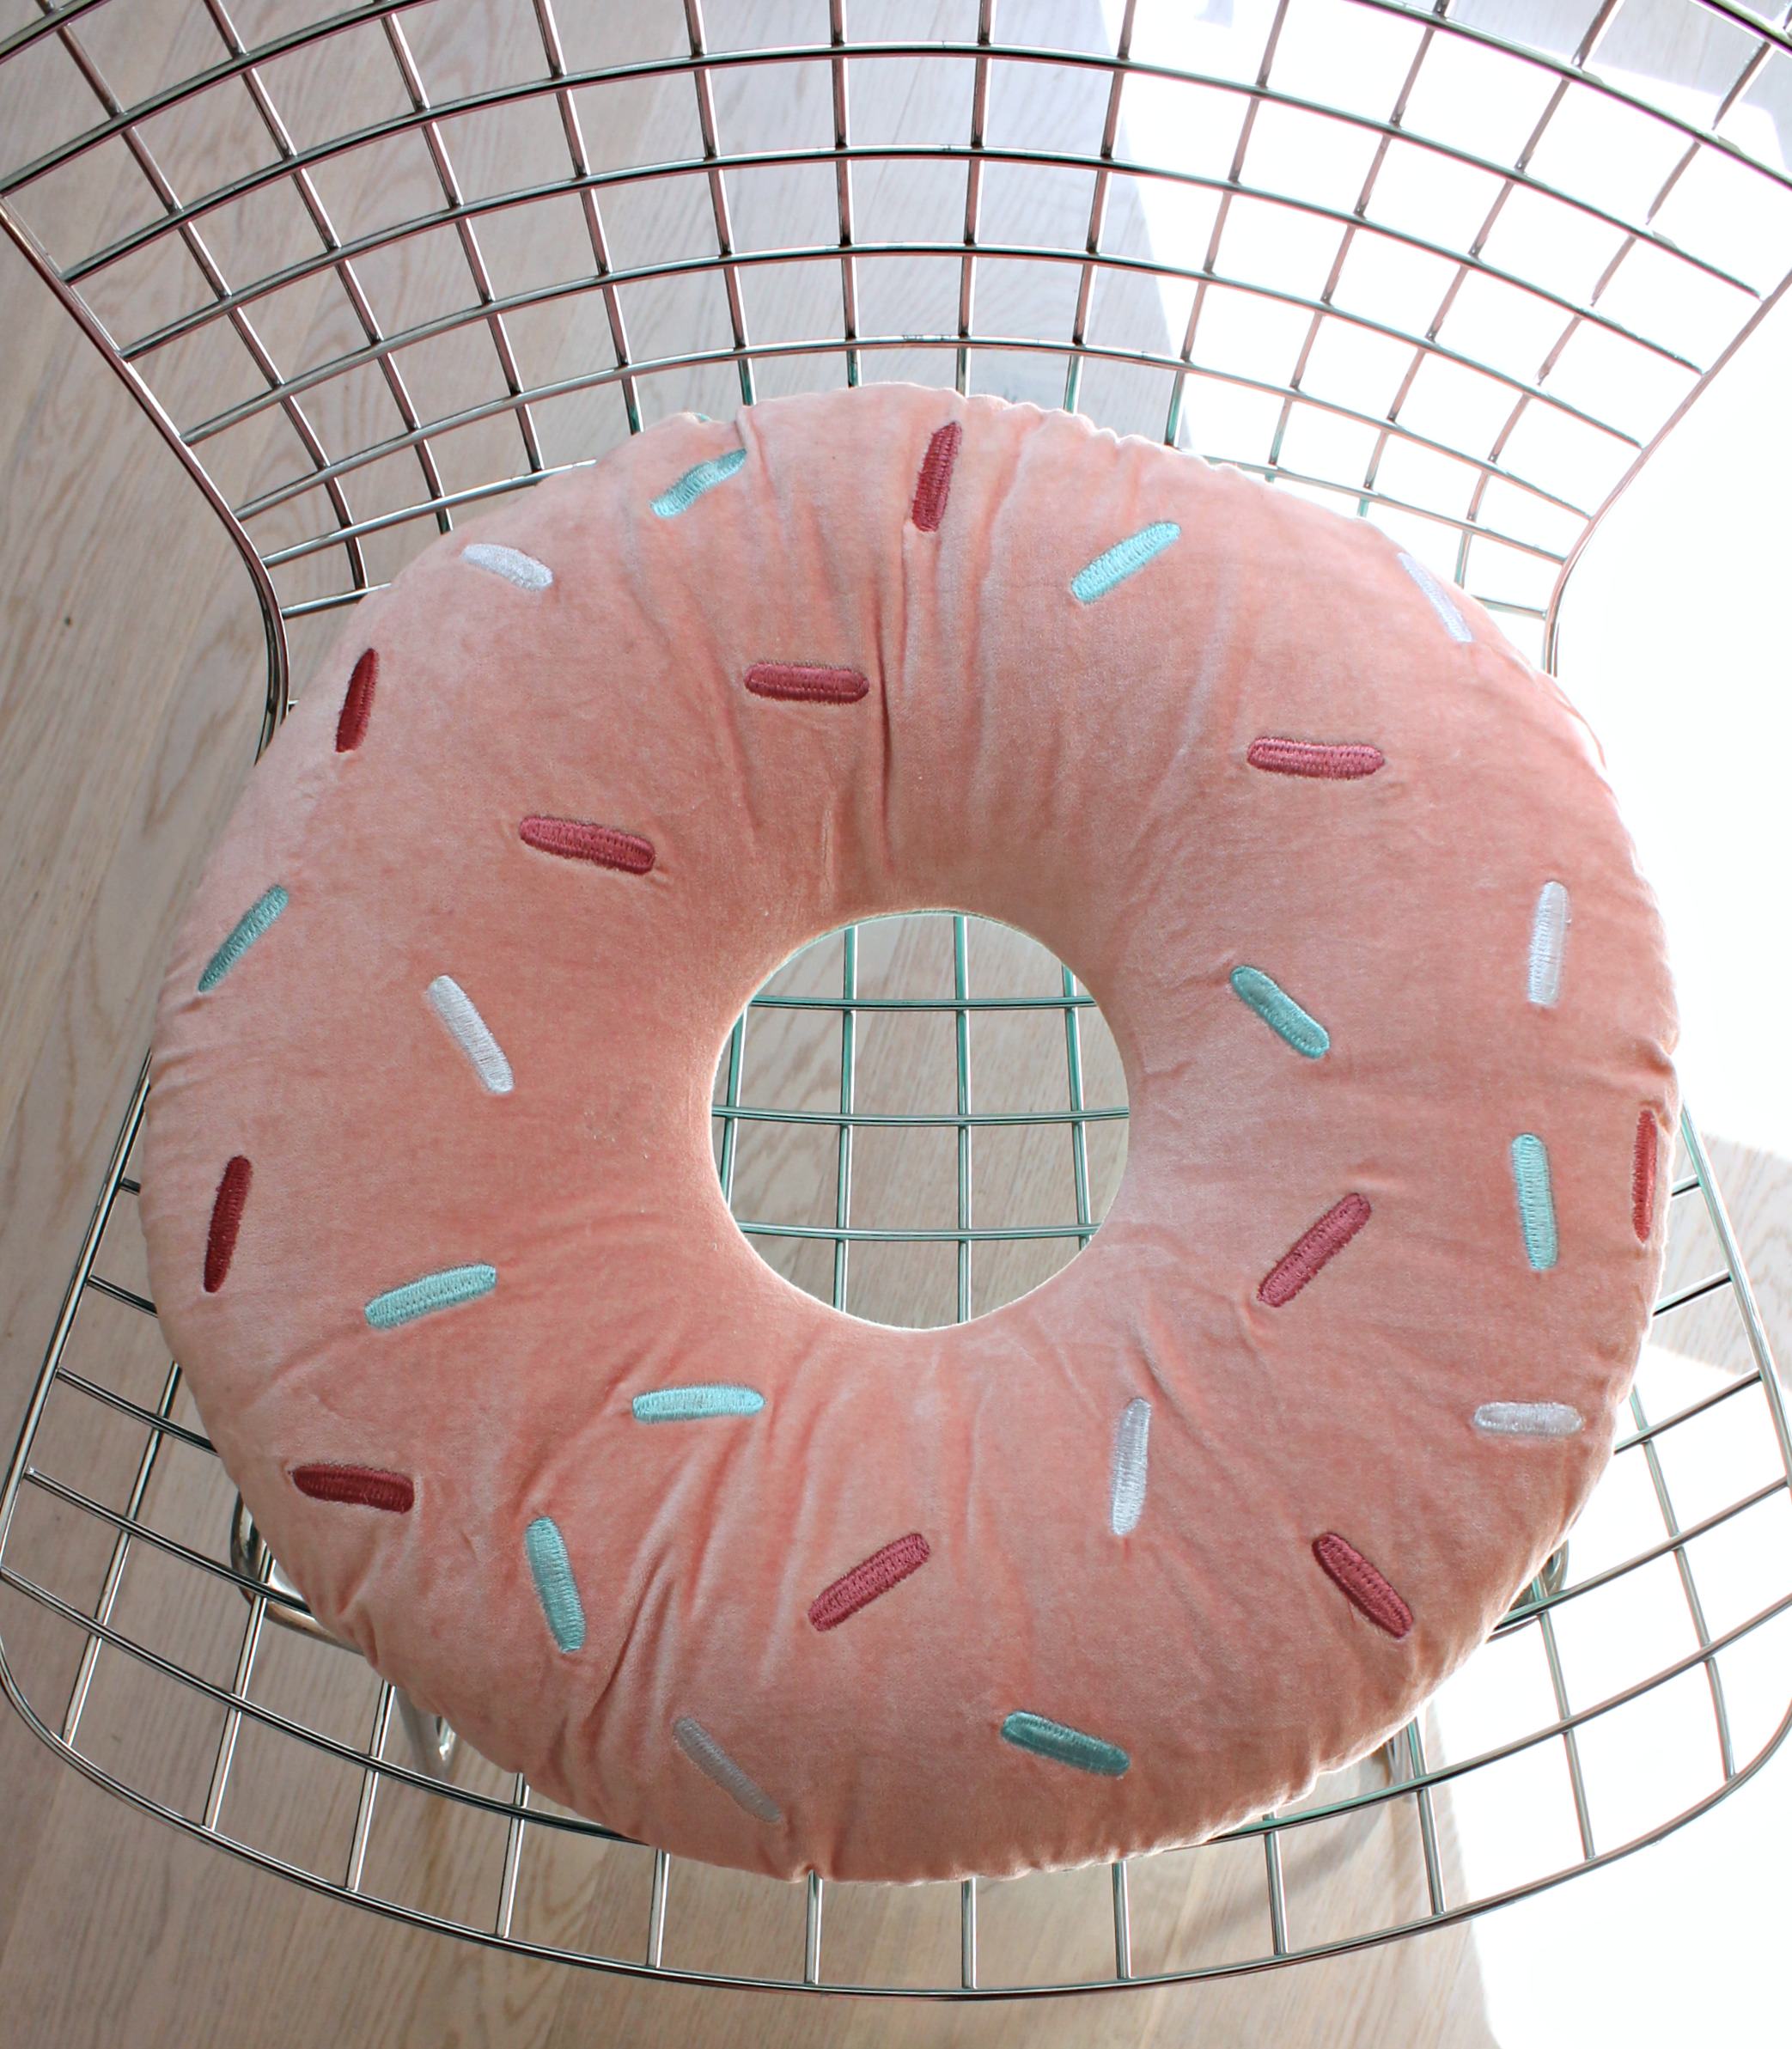 Donut-cushion-from-Arro-home-Little-Big-Bell